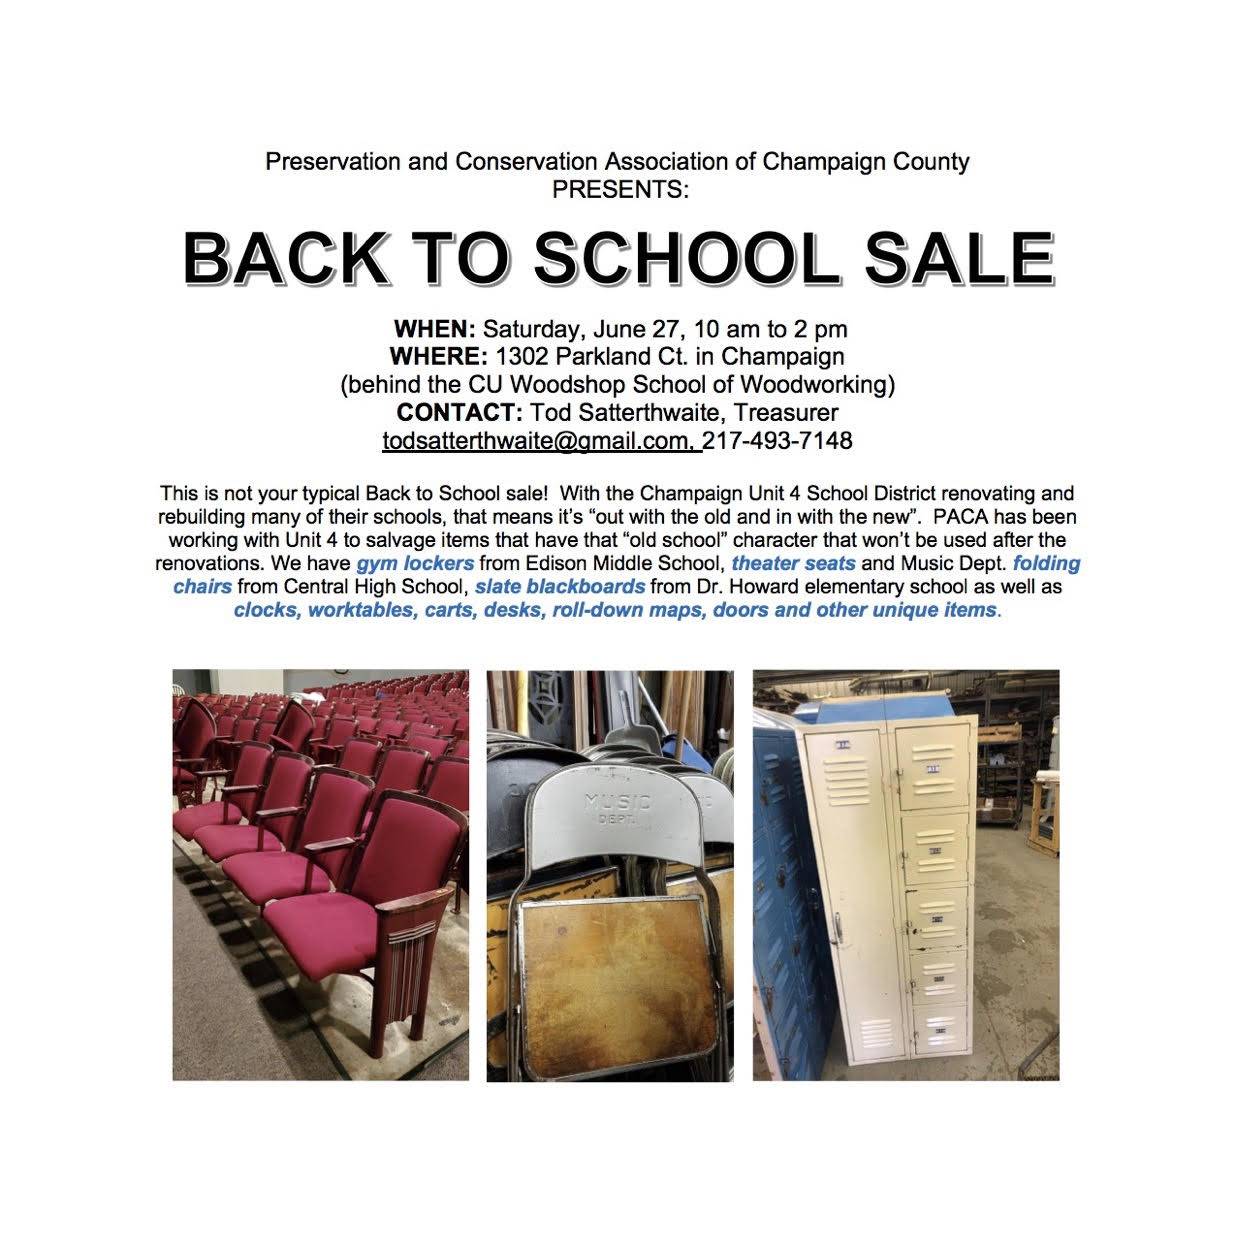 A flyer for PACA's sale of items salvaged from Unit 4 schools. Image courtesy of PACA. 